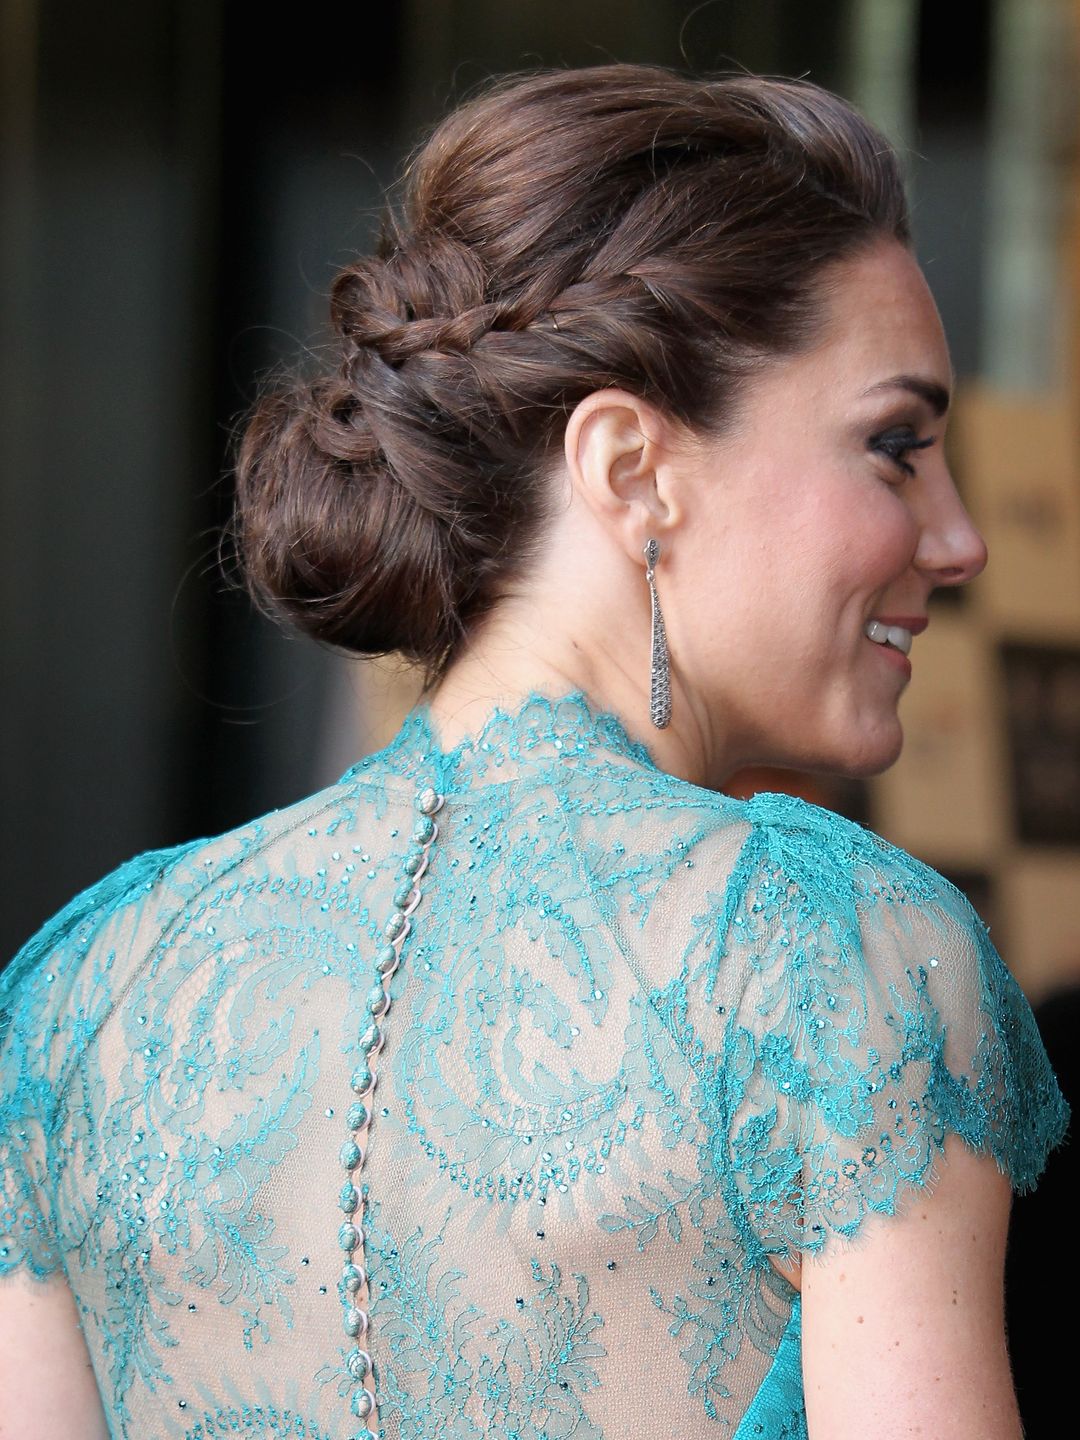 Princess Kate wearing a braided updo hairstyle